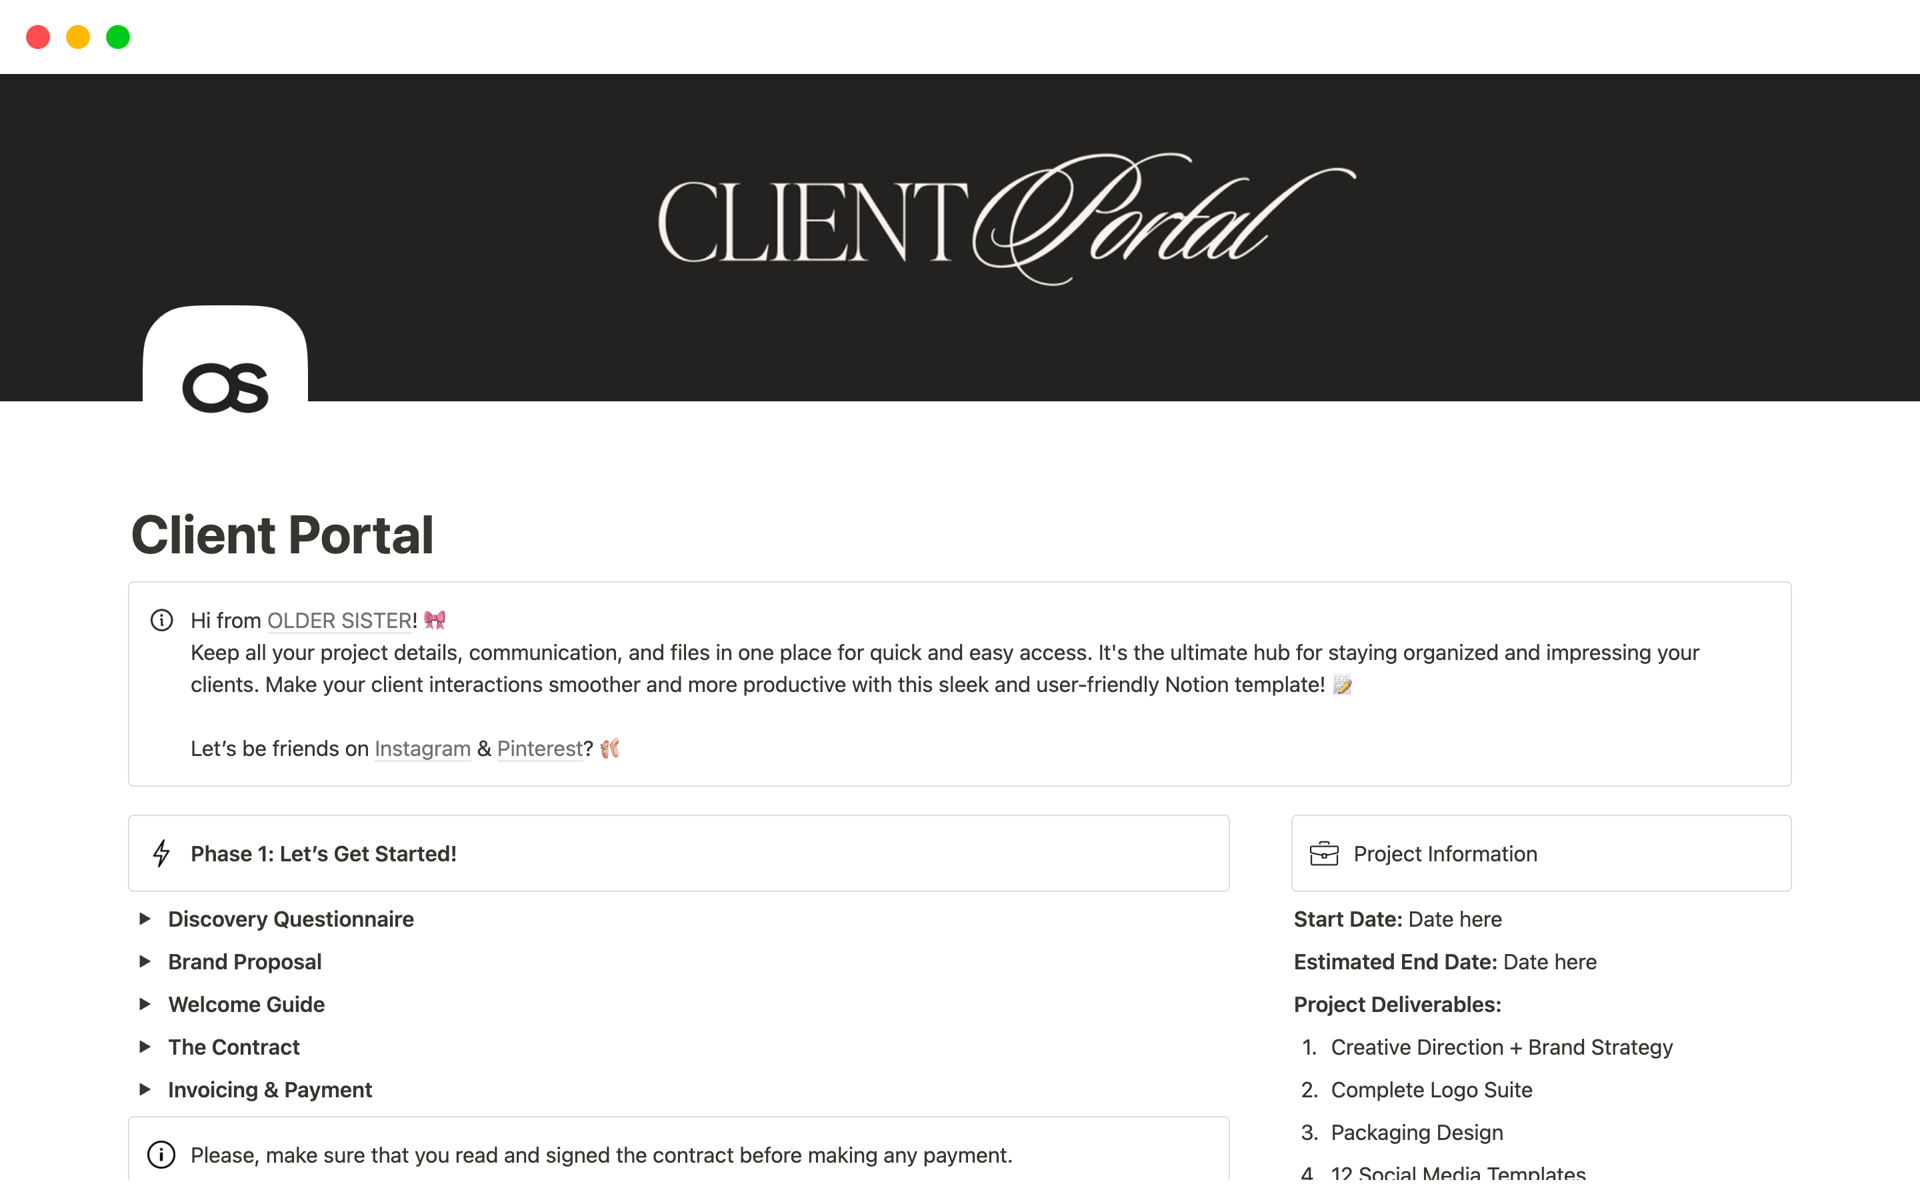 Keep all your project details, communication, and files in one place for quick and easy access. It's the ultimate hub for staying organized and impressing your clients. Make your client interactions smoother and more productive with this sleek and user-friendly template! 📝💻✨💼
